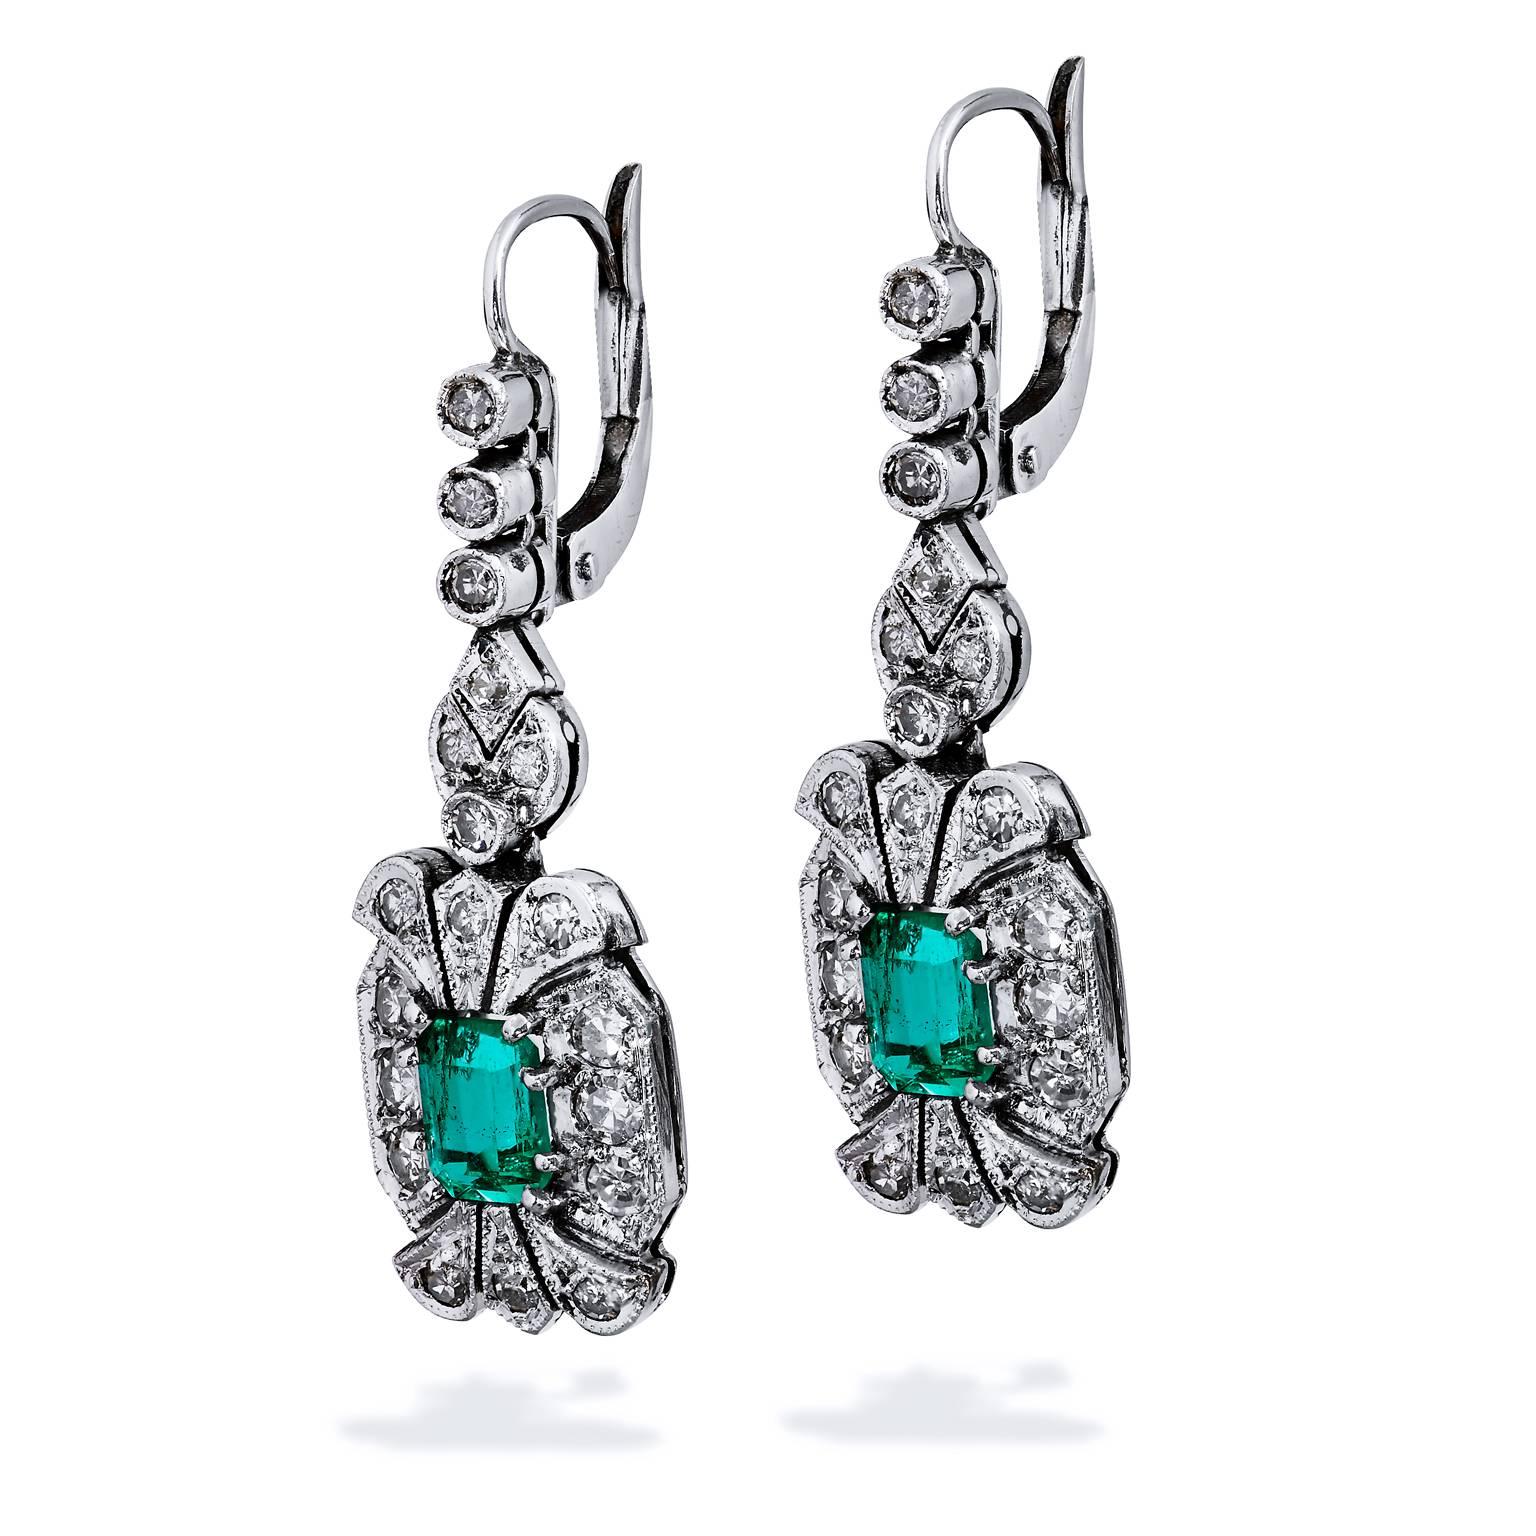 18 karat palladium, emerald, and diamond meld together to tell a story of romance, elegance and beauty in these previously loved drop earrings. Two emeralds, with a total weight of 1.15 carat, are prong set and are enveloped by 0.75 carat of pave